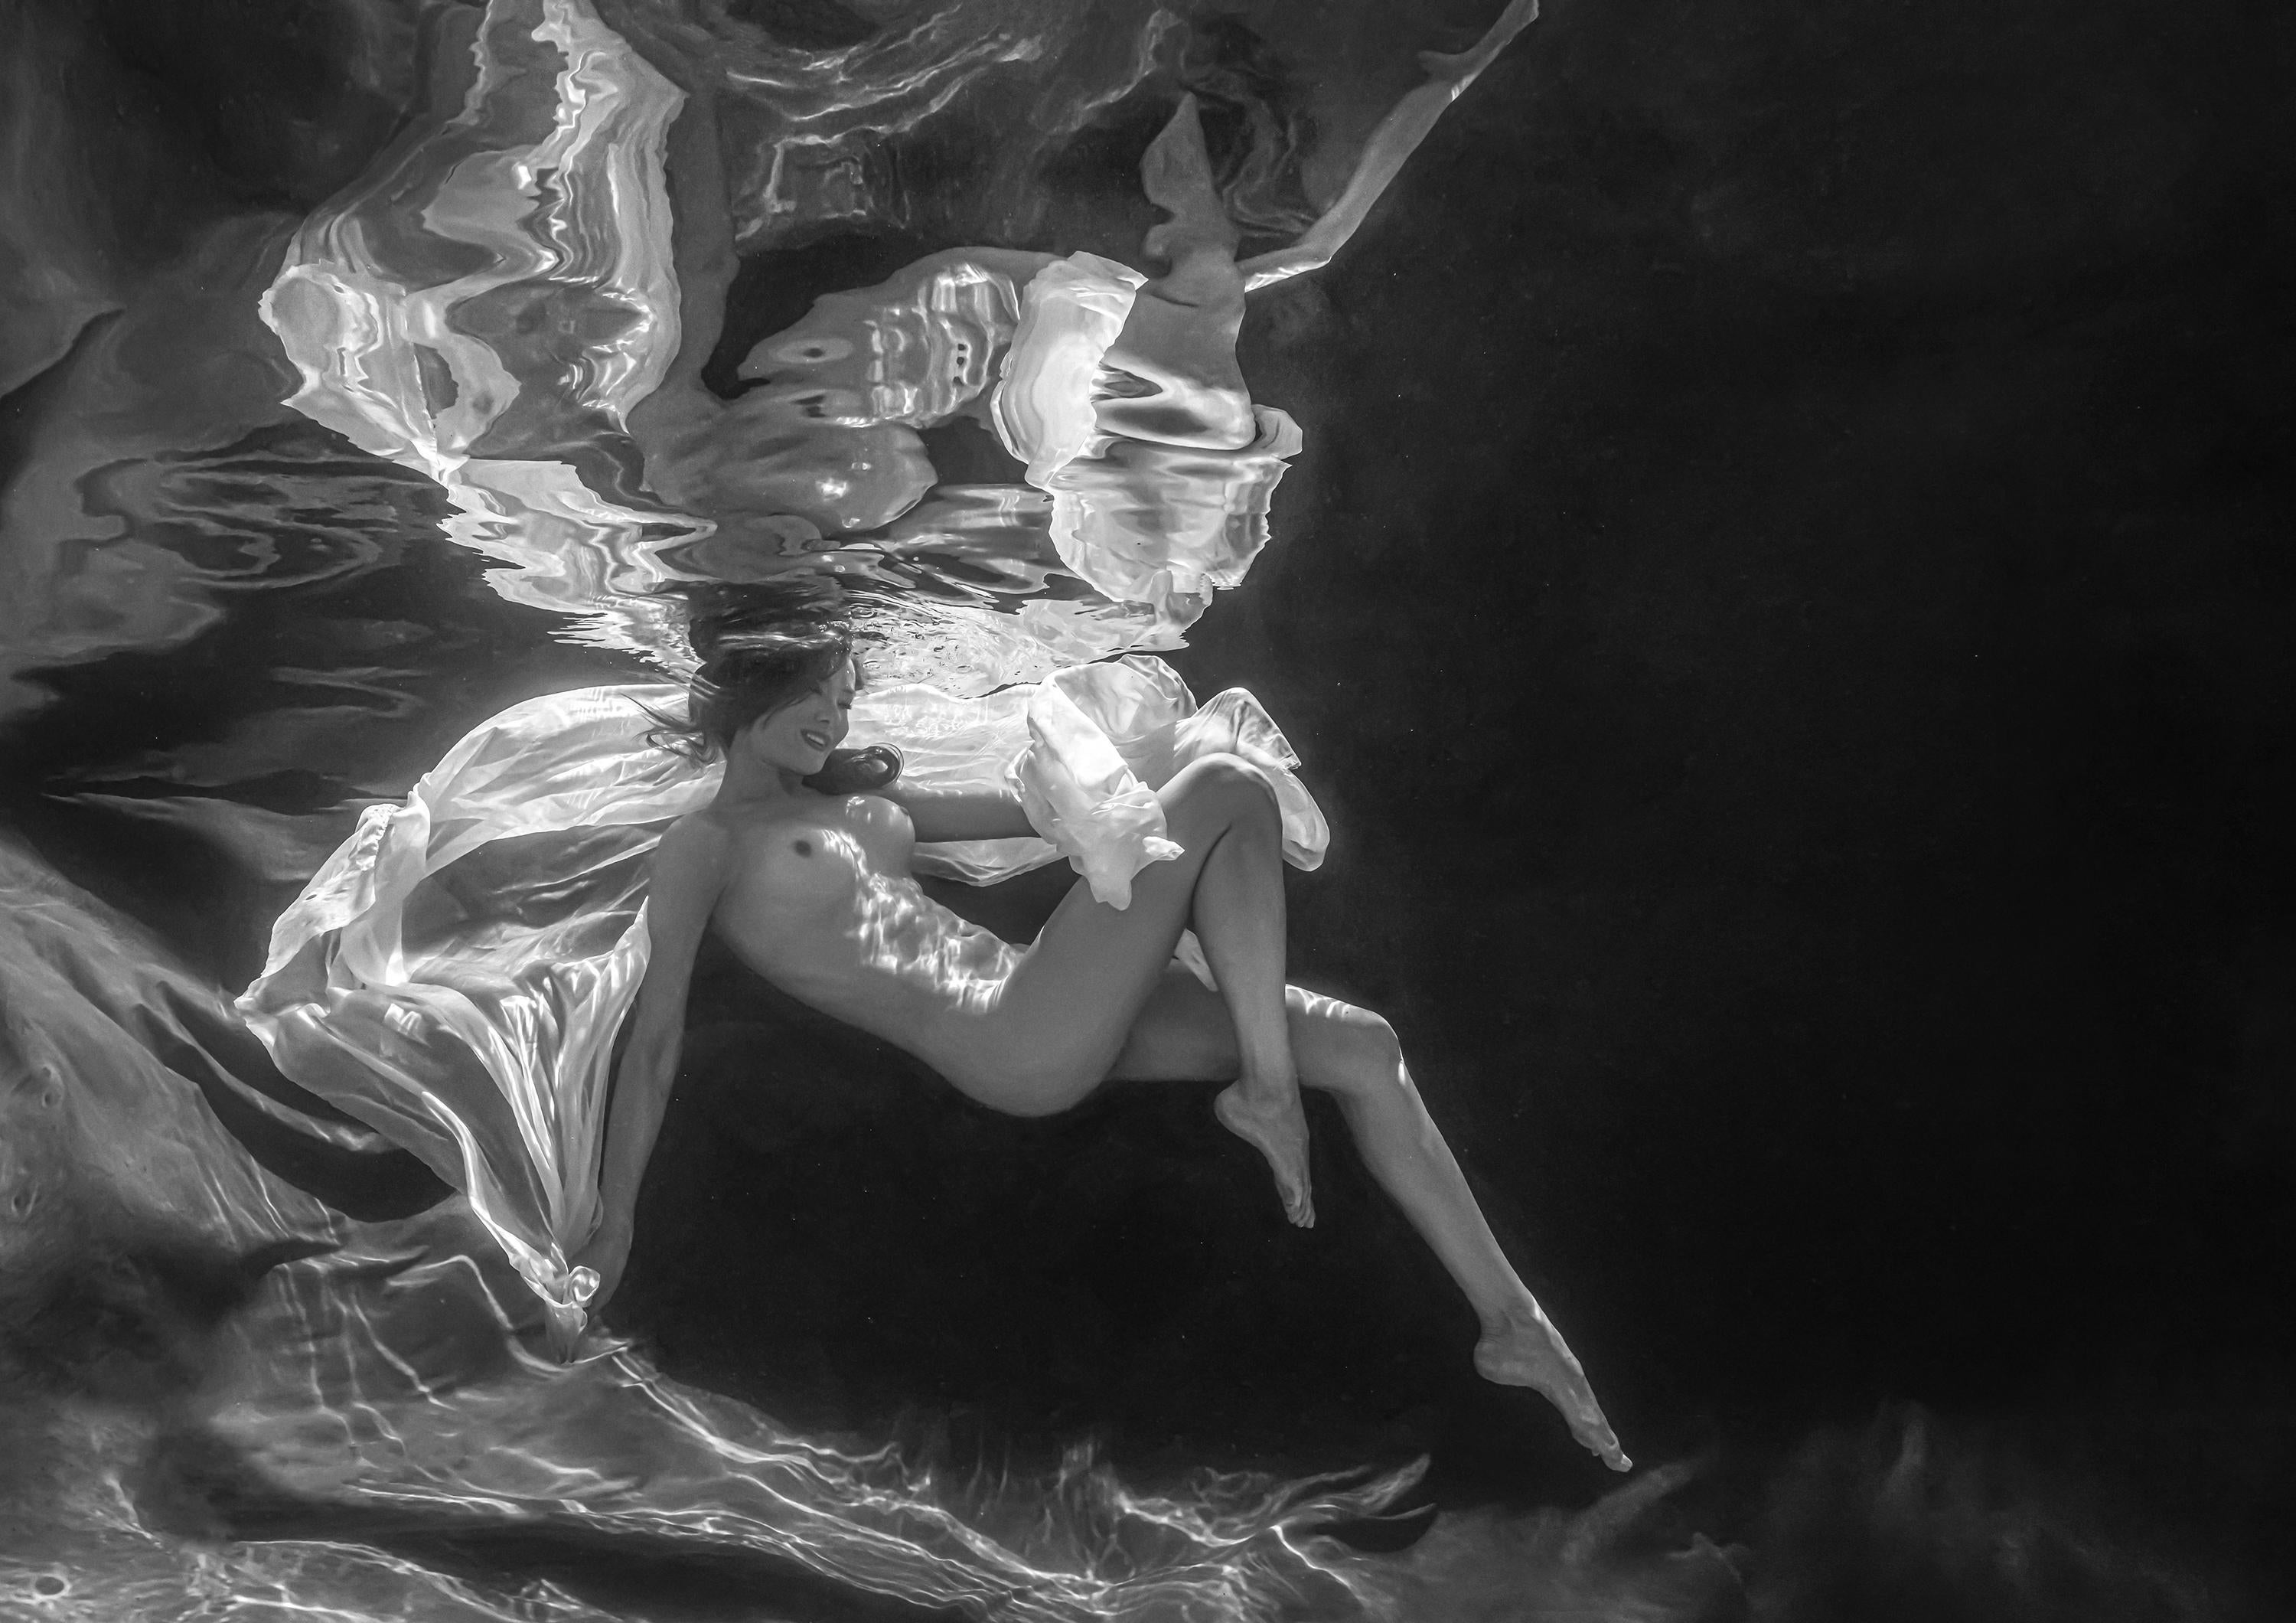 Alex Sher Black and White Photograph - In the Hall of the Mountain King - underwater b&w nude photograph - paper 24х35"